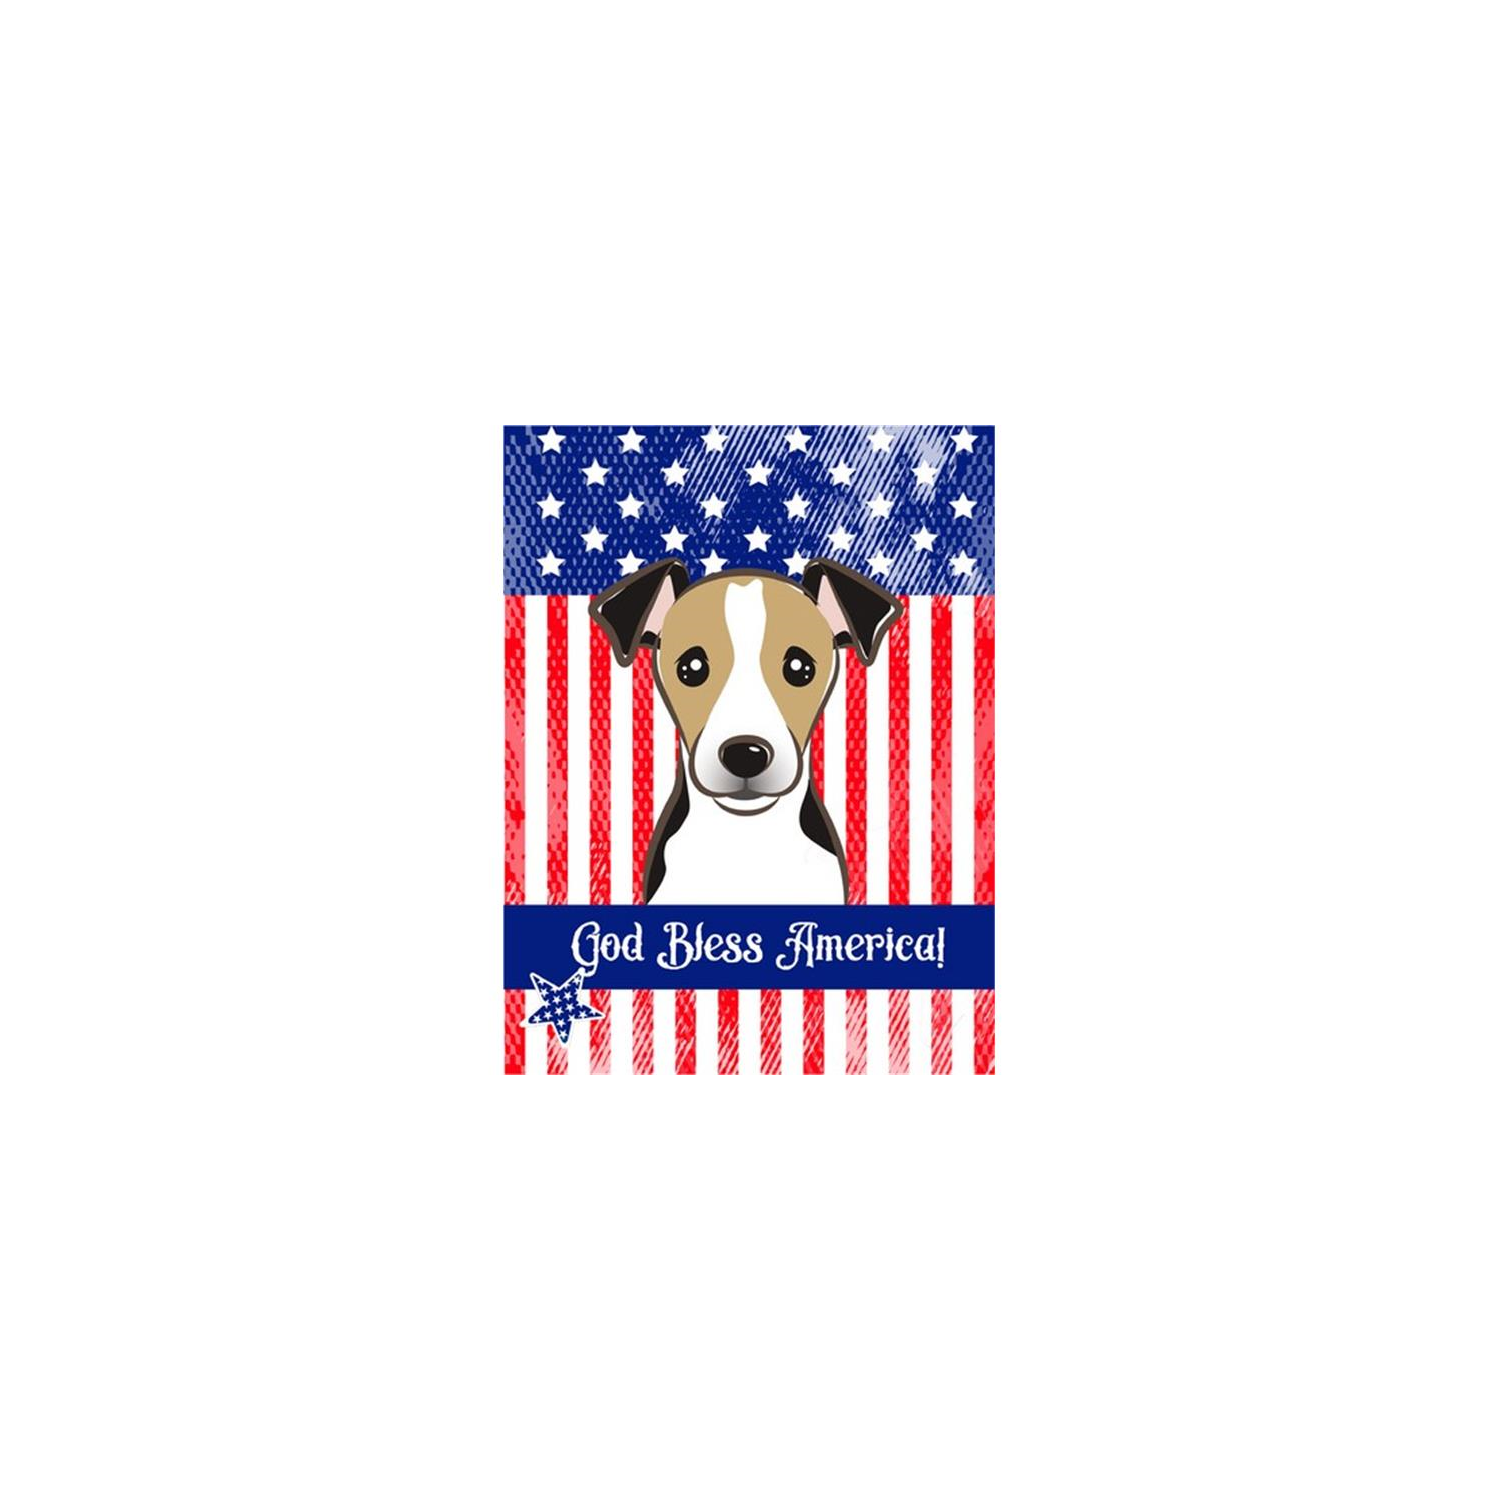 Carolines Treasures BB2191GF God Bless American Flag with Jack Russell Terrier Flag Garden